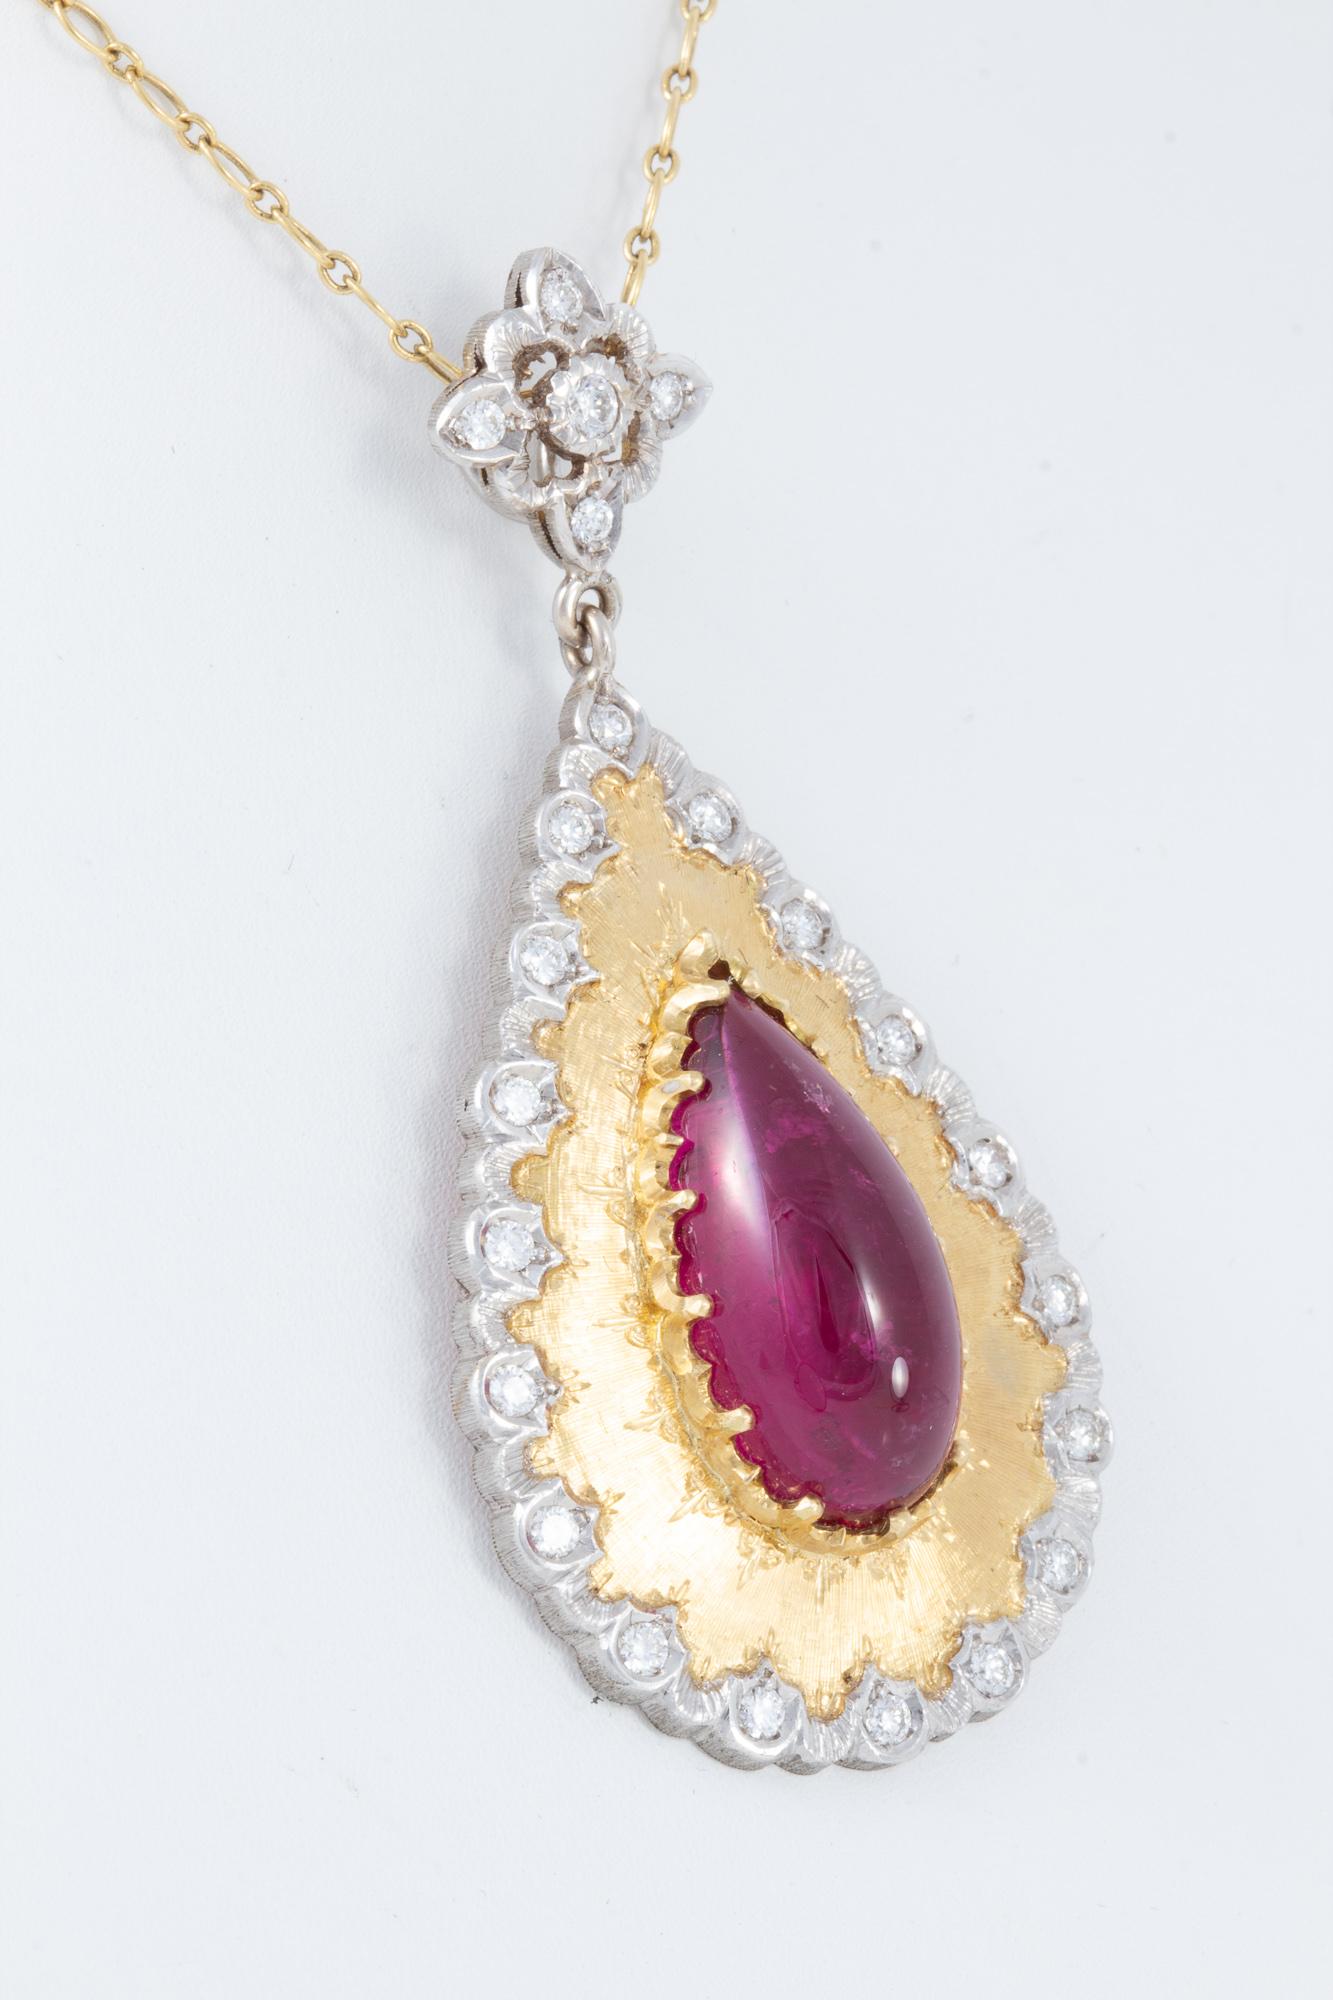 Beautifully handcrafted pendant featuring 14.6 carat Rubellite Tourmaline.  Exceptionally clean stone with near perfect color,  the Tourmaline is surrounded by  .78 carats of F/G VS1 diamonds.Handcrafted by a small family run studio in Florence,